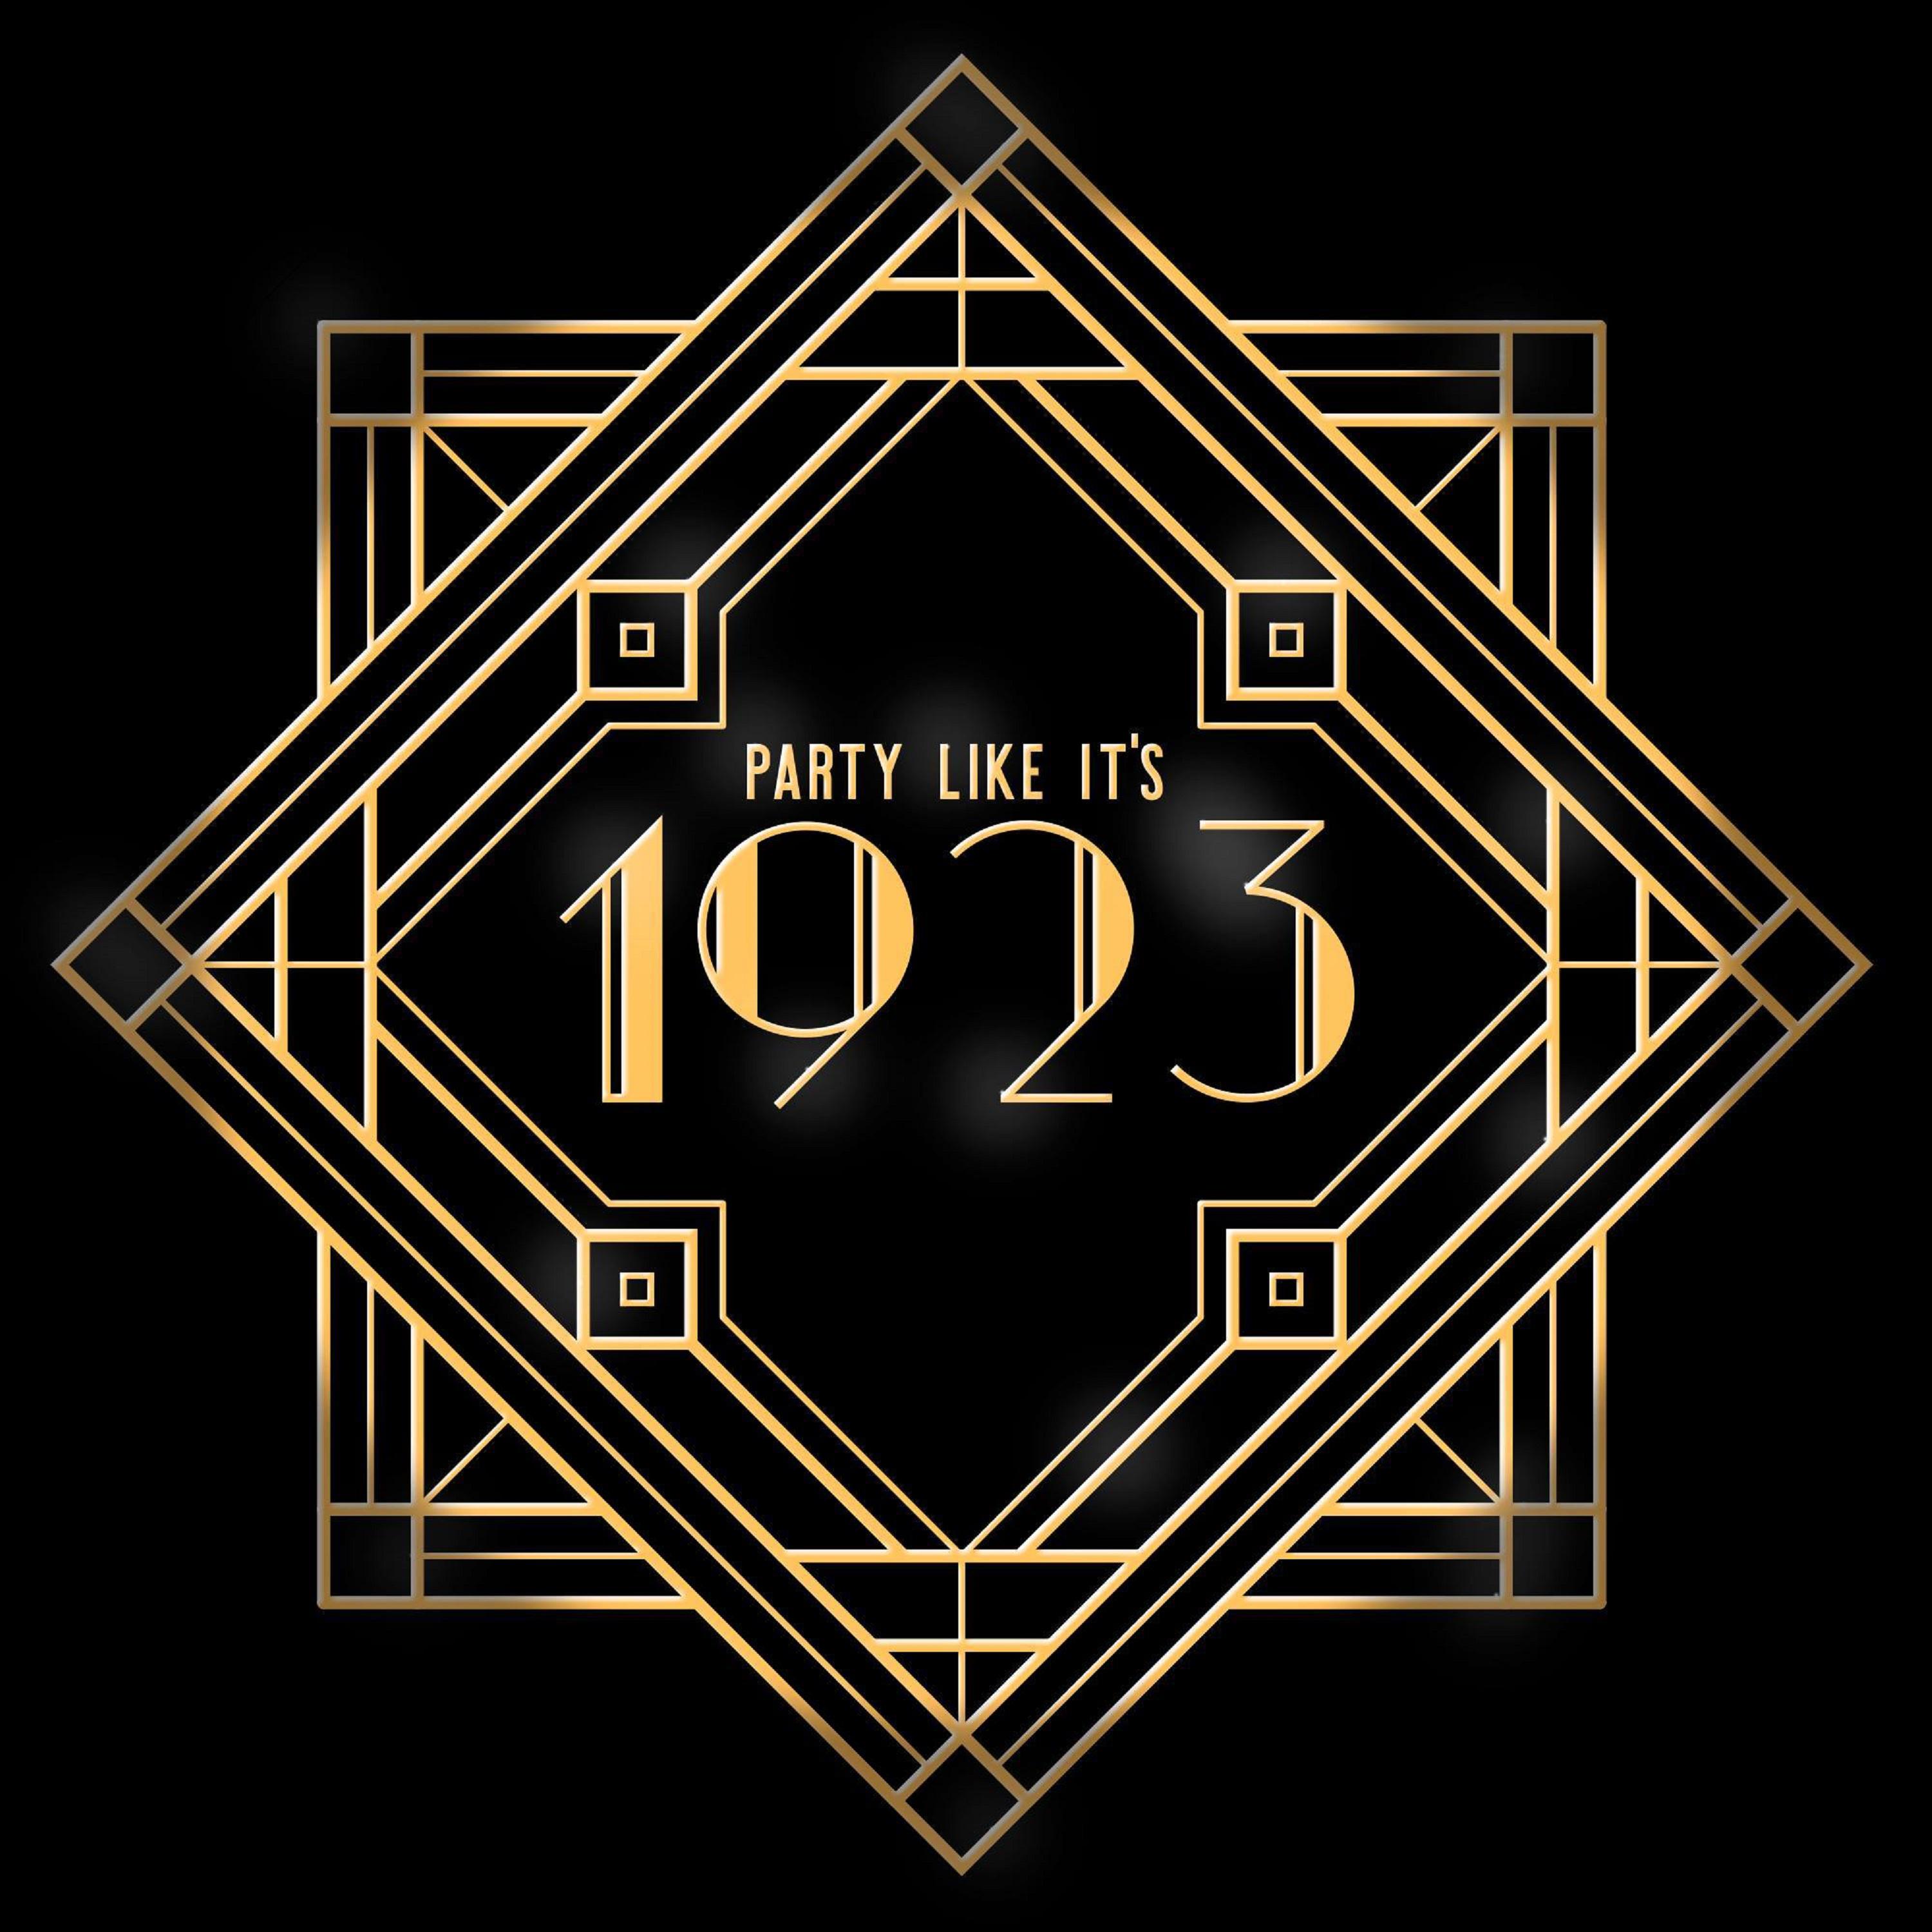 Party Like It's 1923